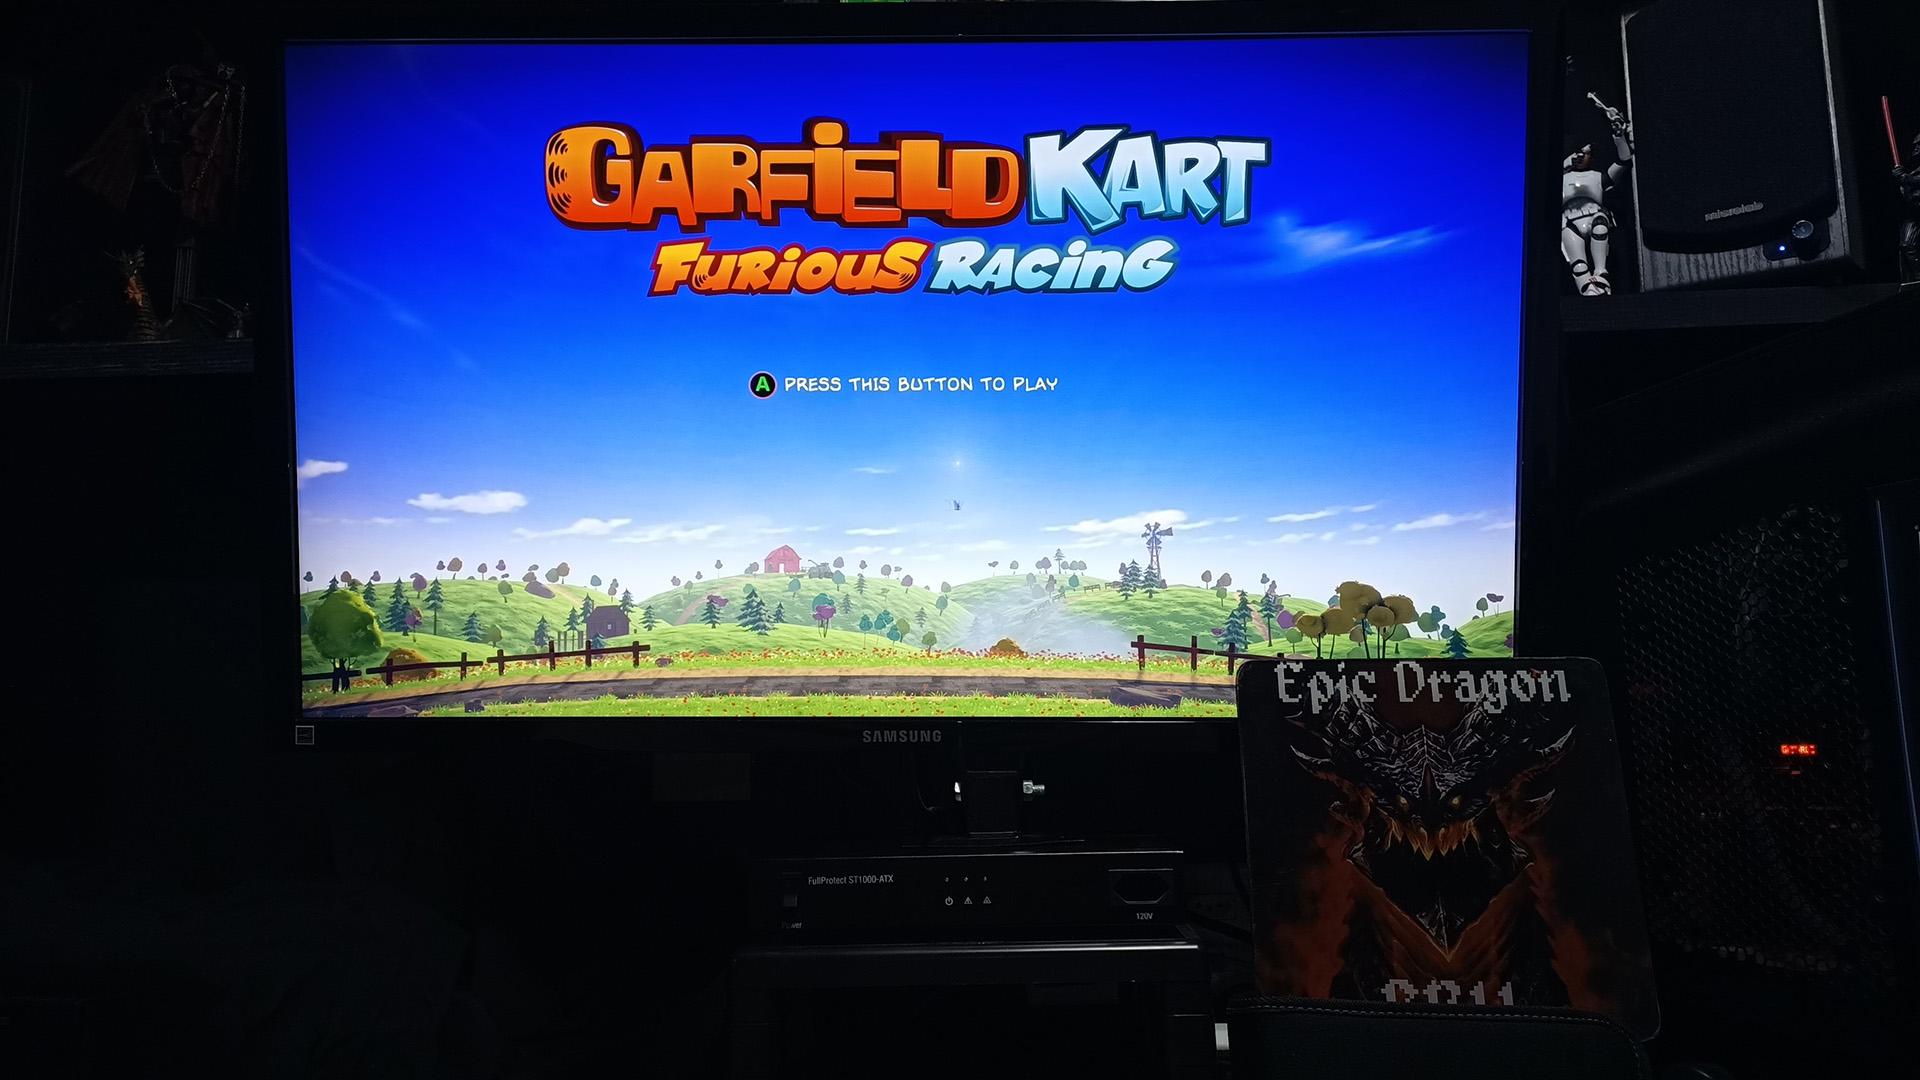 EpicDragon: Garfield Kart Furious Racing: Country Bumpkin [Time Trial: 3 Laps] (PC) 0:02:13.305 points on 2022-08-05 17:43:02